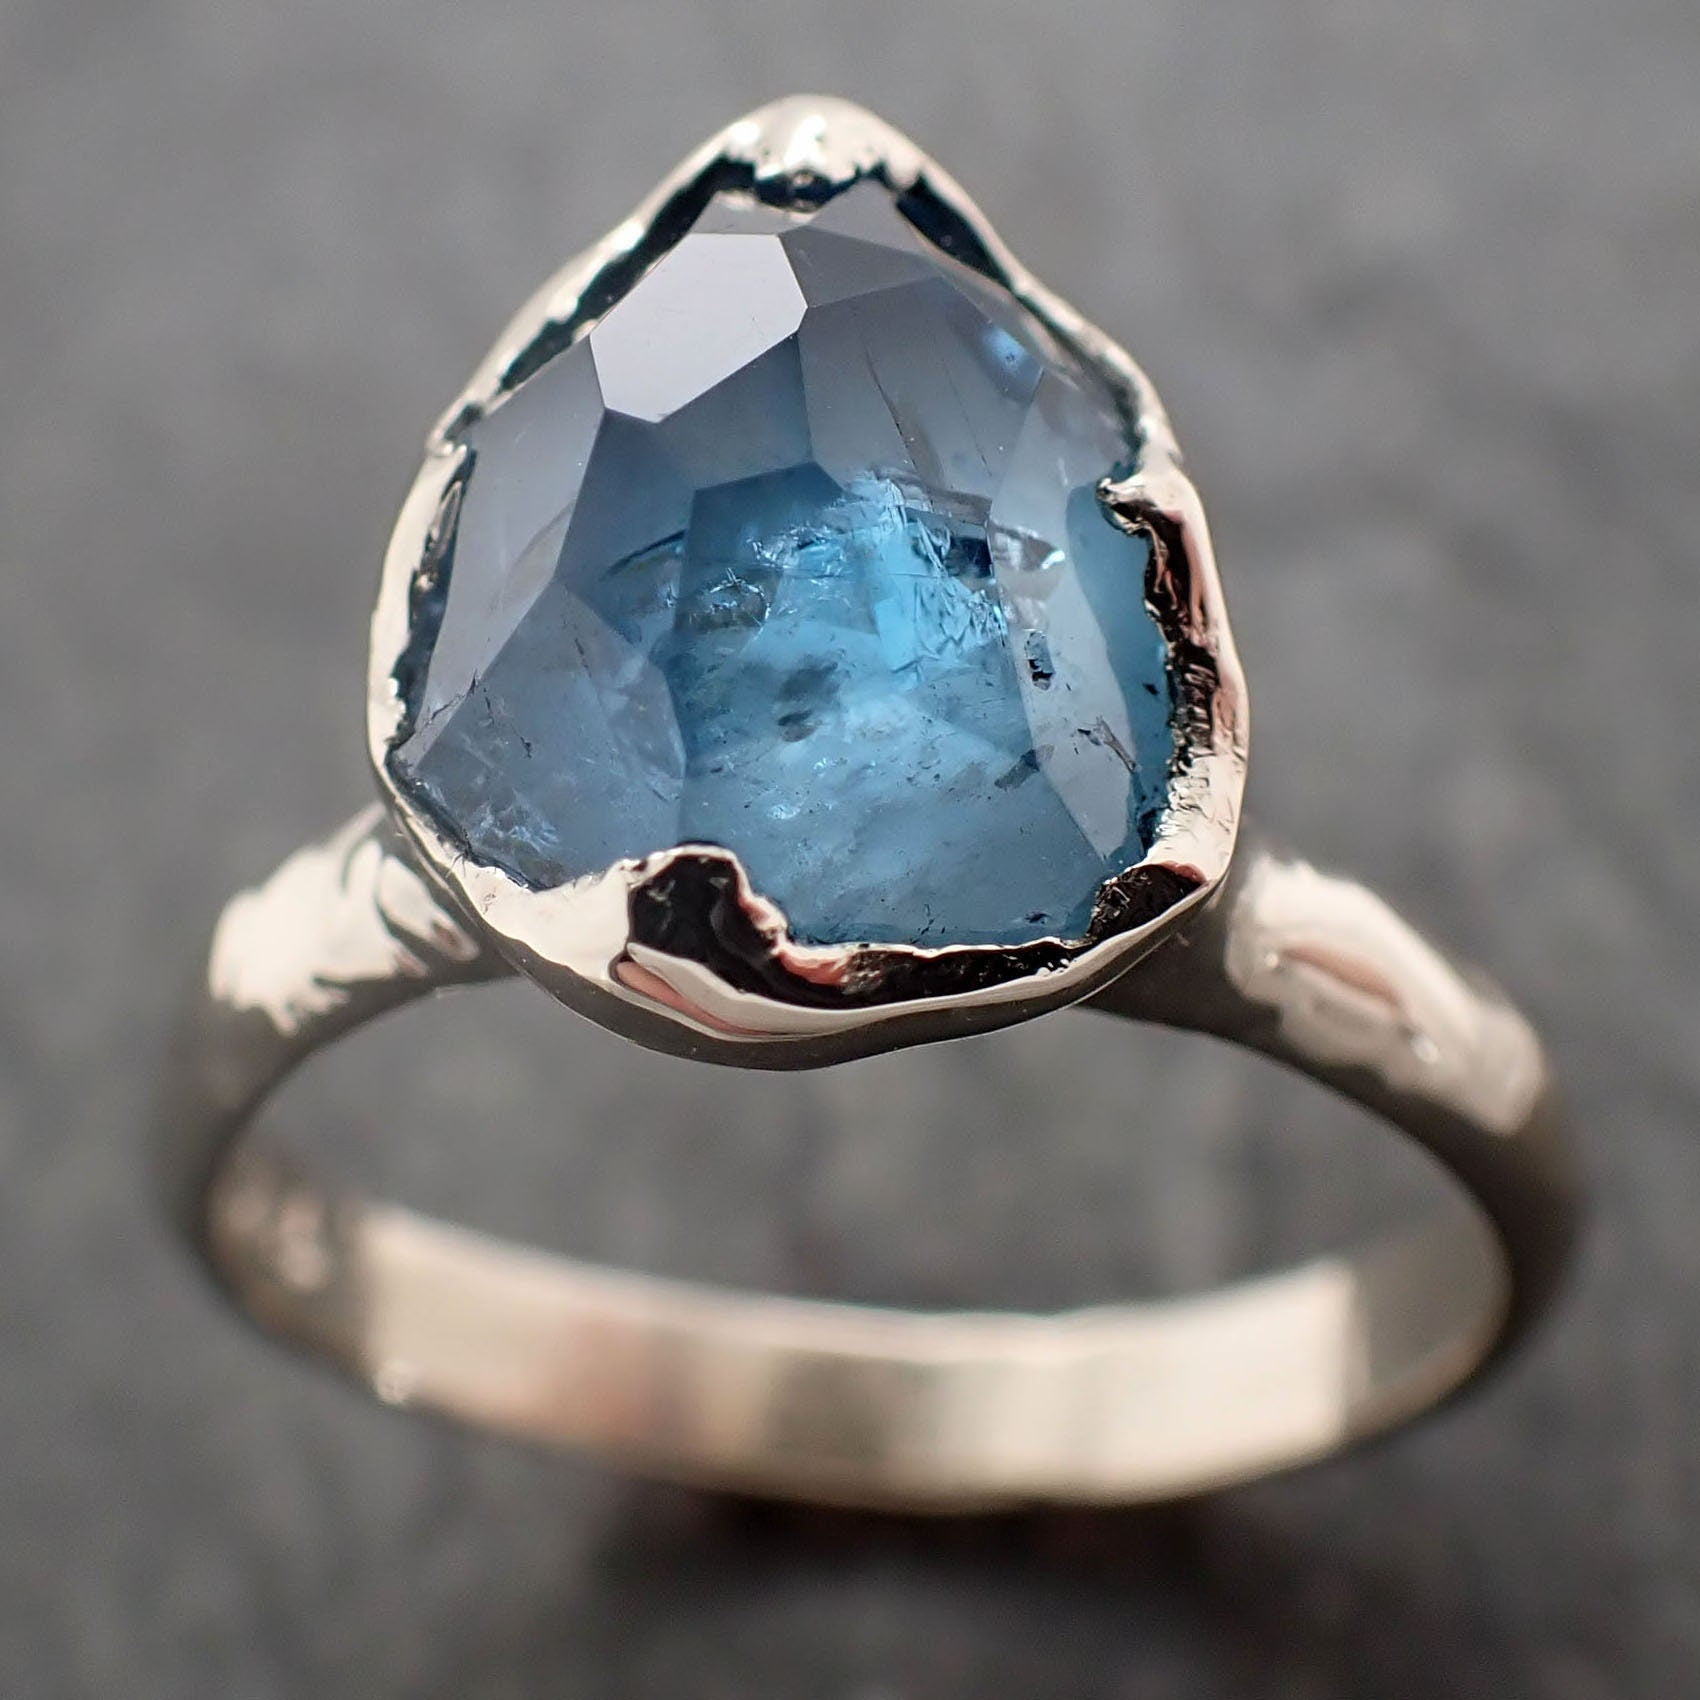 Partially faceted Aquamarine Solitaire Ring 18k gold Custom One Of a Kind Gemstone Ring Bespoke byAngeline 2988